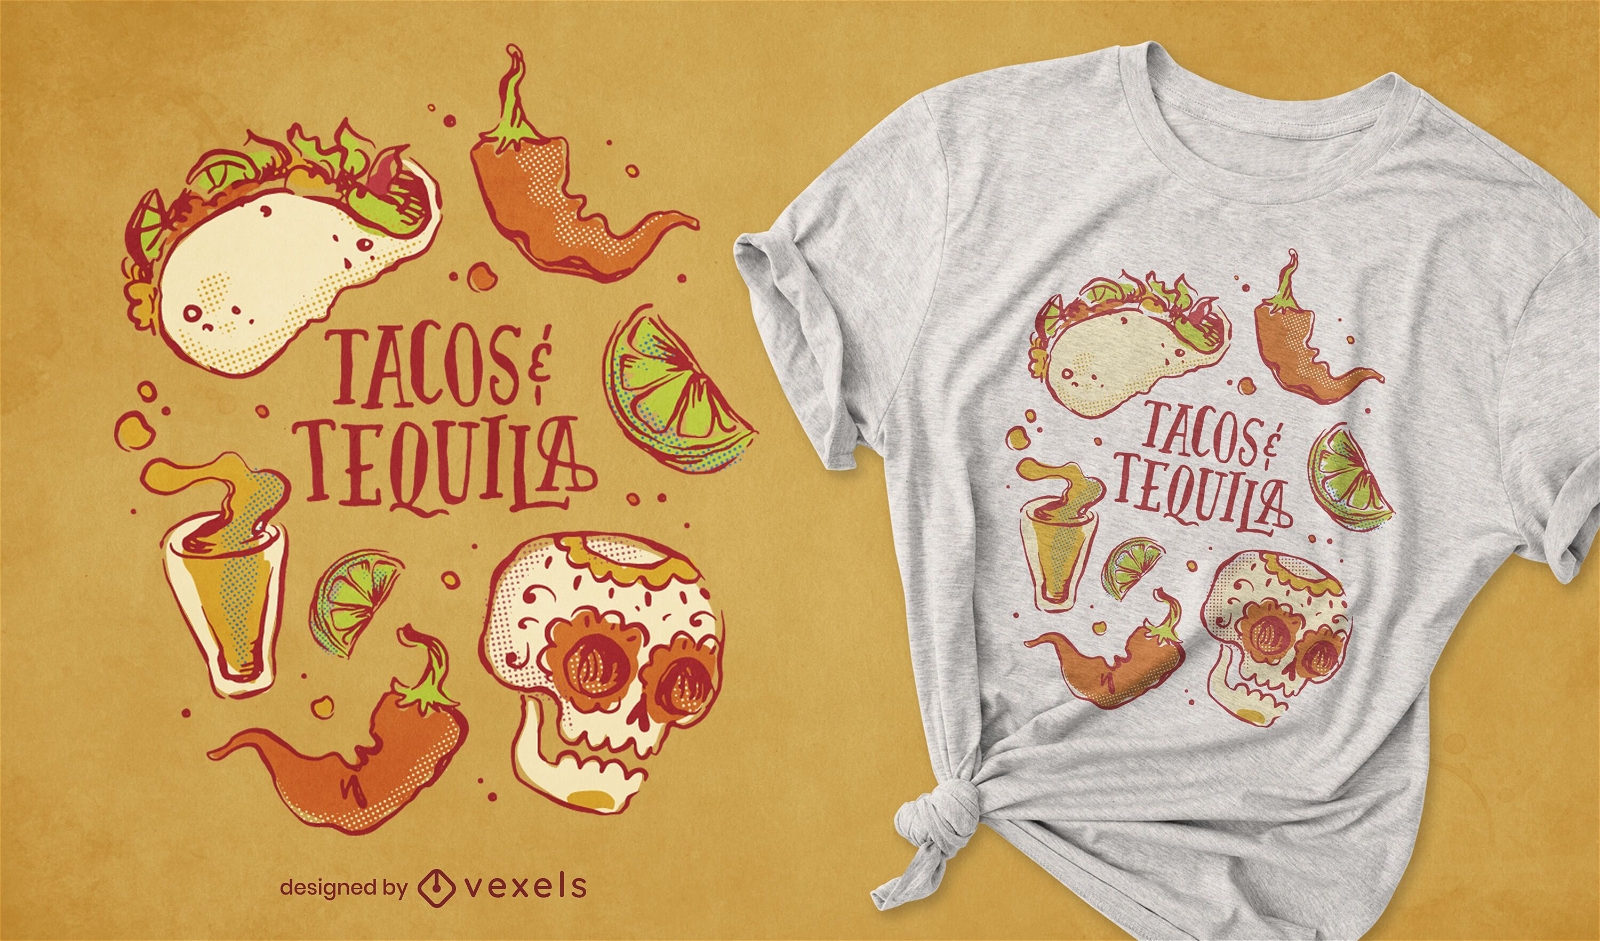 Tacos and tequila t-shirt design